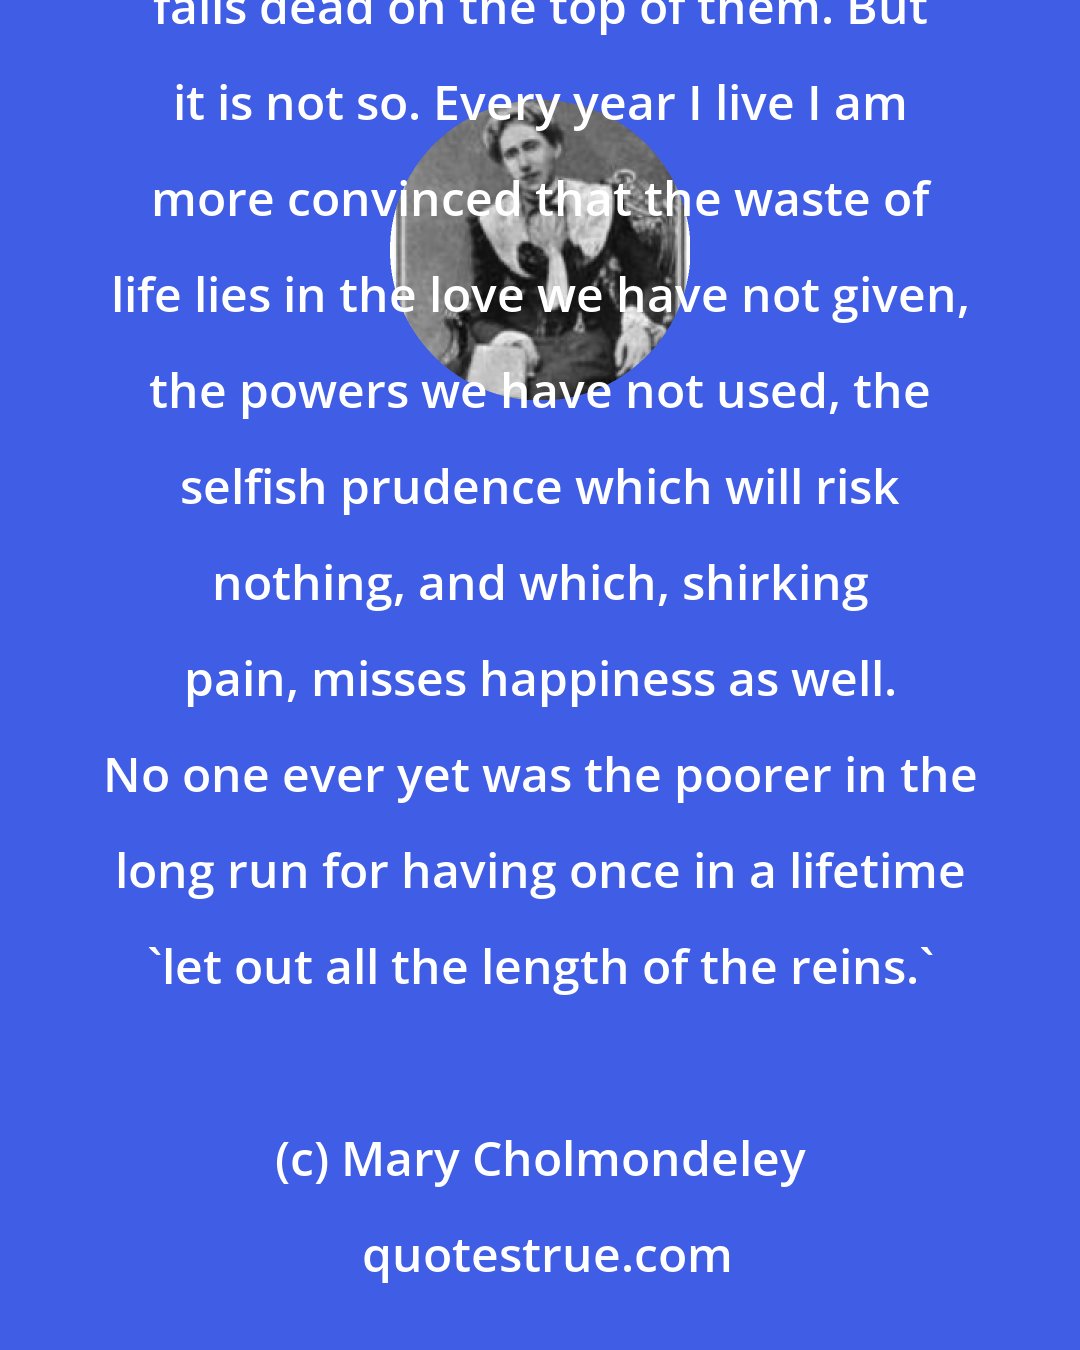 Mary Cholmondeley: It looks like a waste of life, that mowing down of our best years by a relentless passion which itself falls dead on the top of them. But it is not so. Every year I live I am more convinced that the waste of life lies in the love we have not given, the powers we have not used, the selfish prudence which will risk nothing, and which, shirking pain, misses happiness as well. No one ever yet was the poorer in the long run for having once in a lifetime 'let out all the length of the reins.'